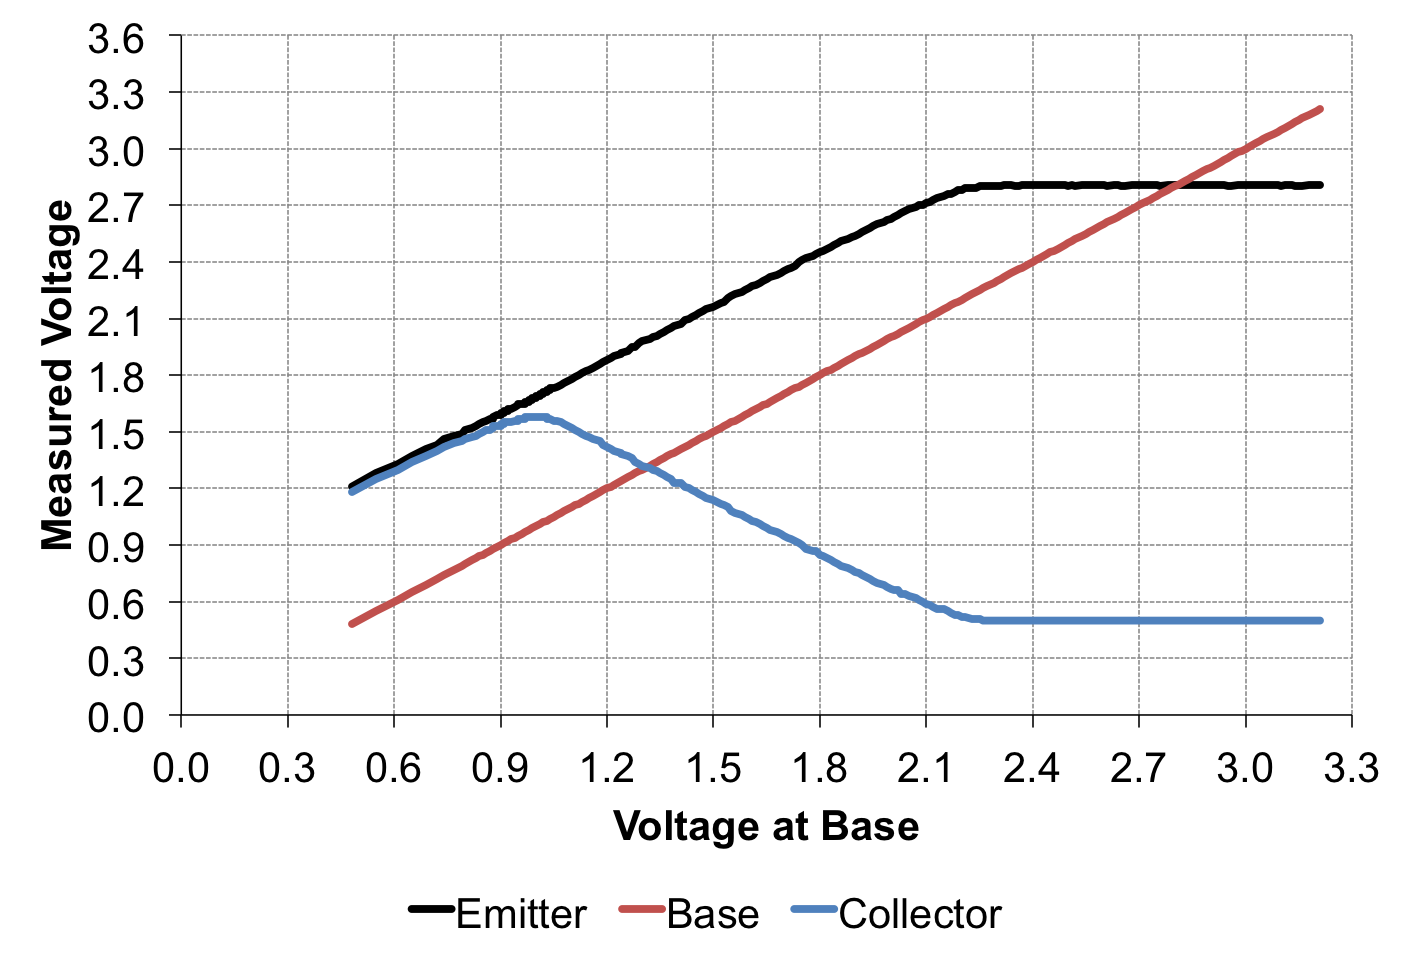 Voltage at the collector, base, and emitter as base is changed on a PNP transistor